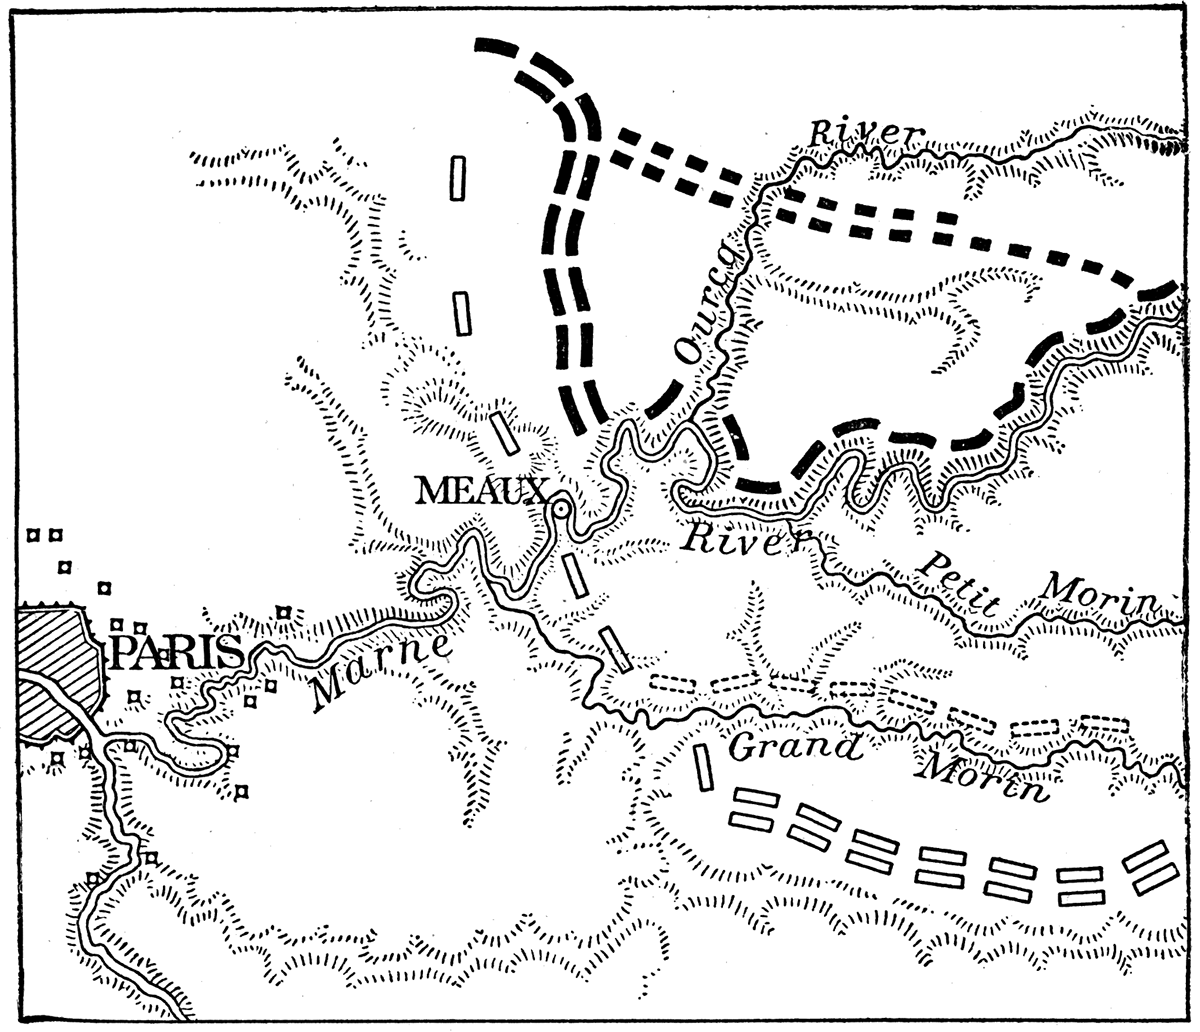 Approximate German positions at the battle of the Marne.